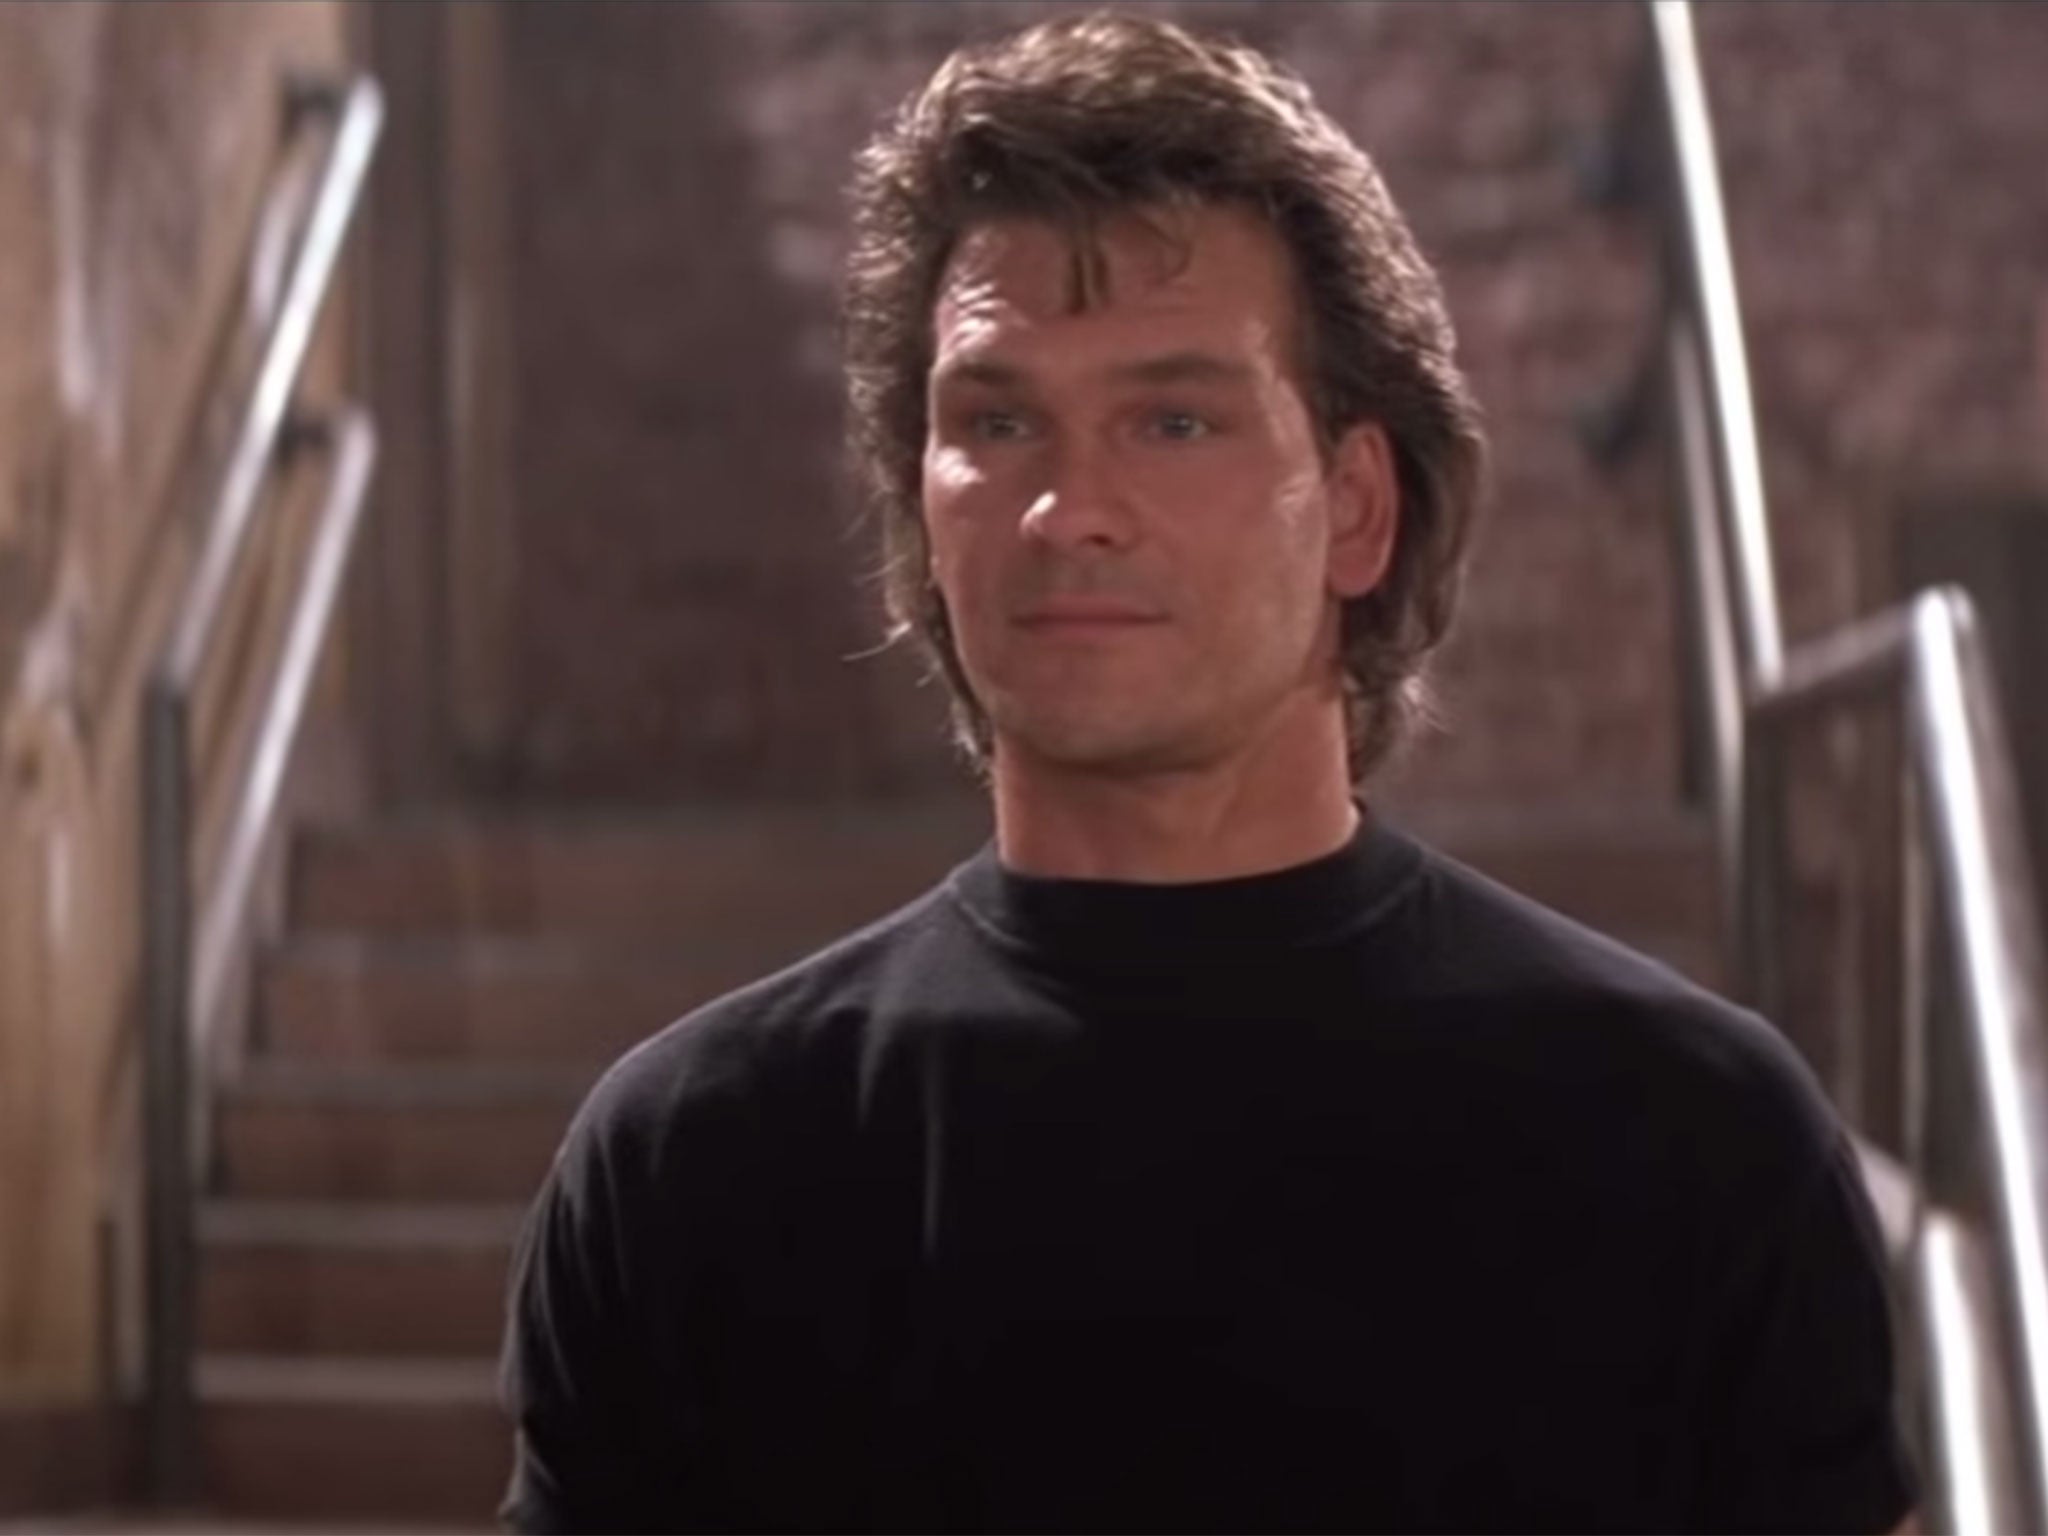 NYPD using Patrick Swayze movie Road House to train police officers ...